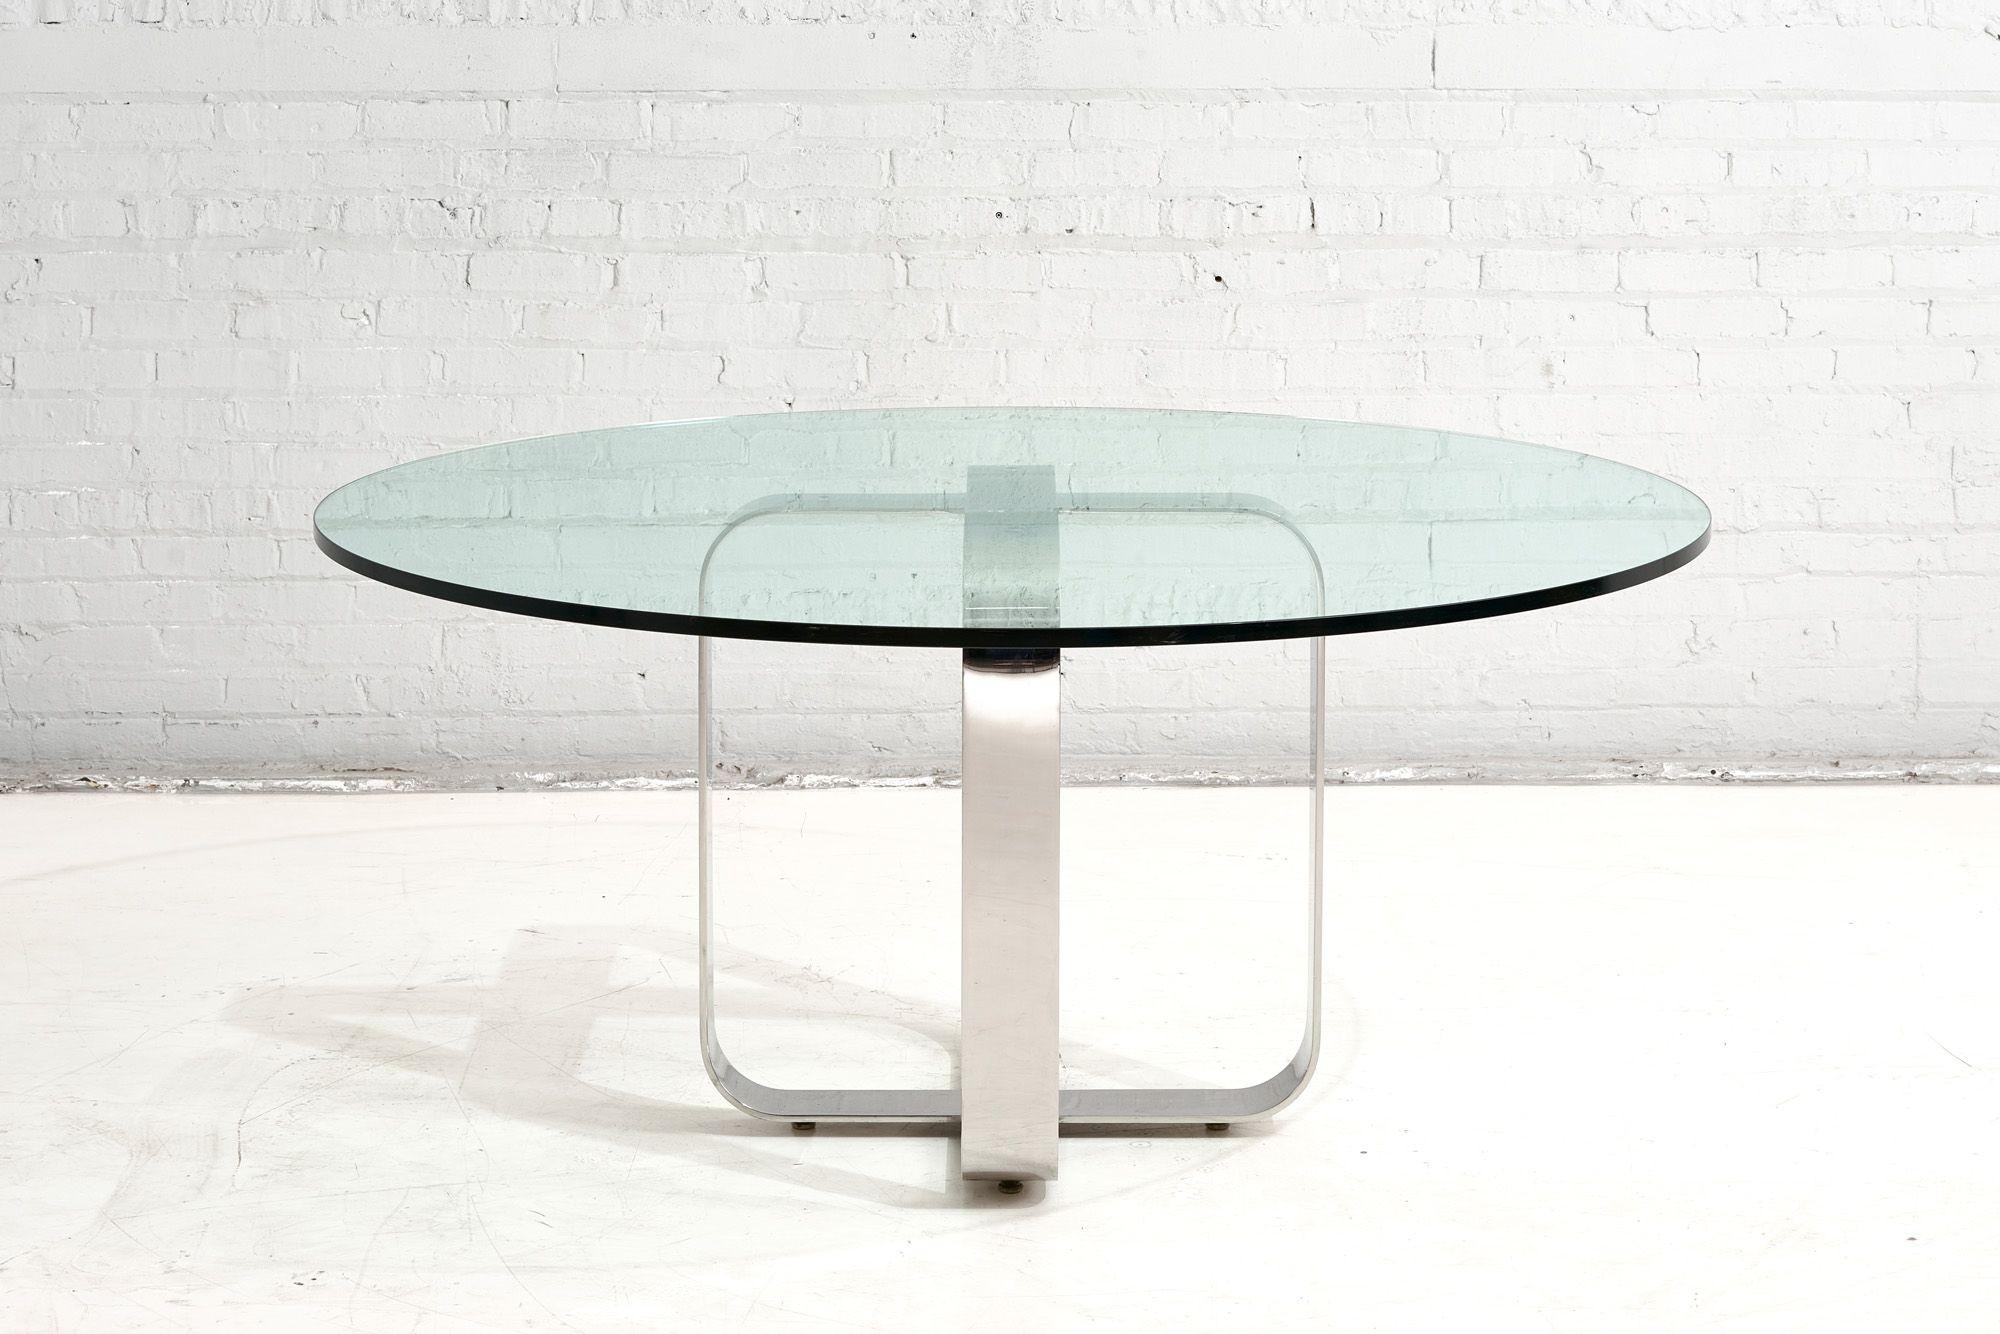 Gary Gutterman Stainless Steel and Glass Dining Table, Axius Designs, 1970
Glass is 60